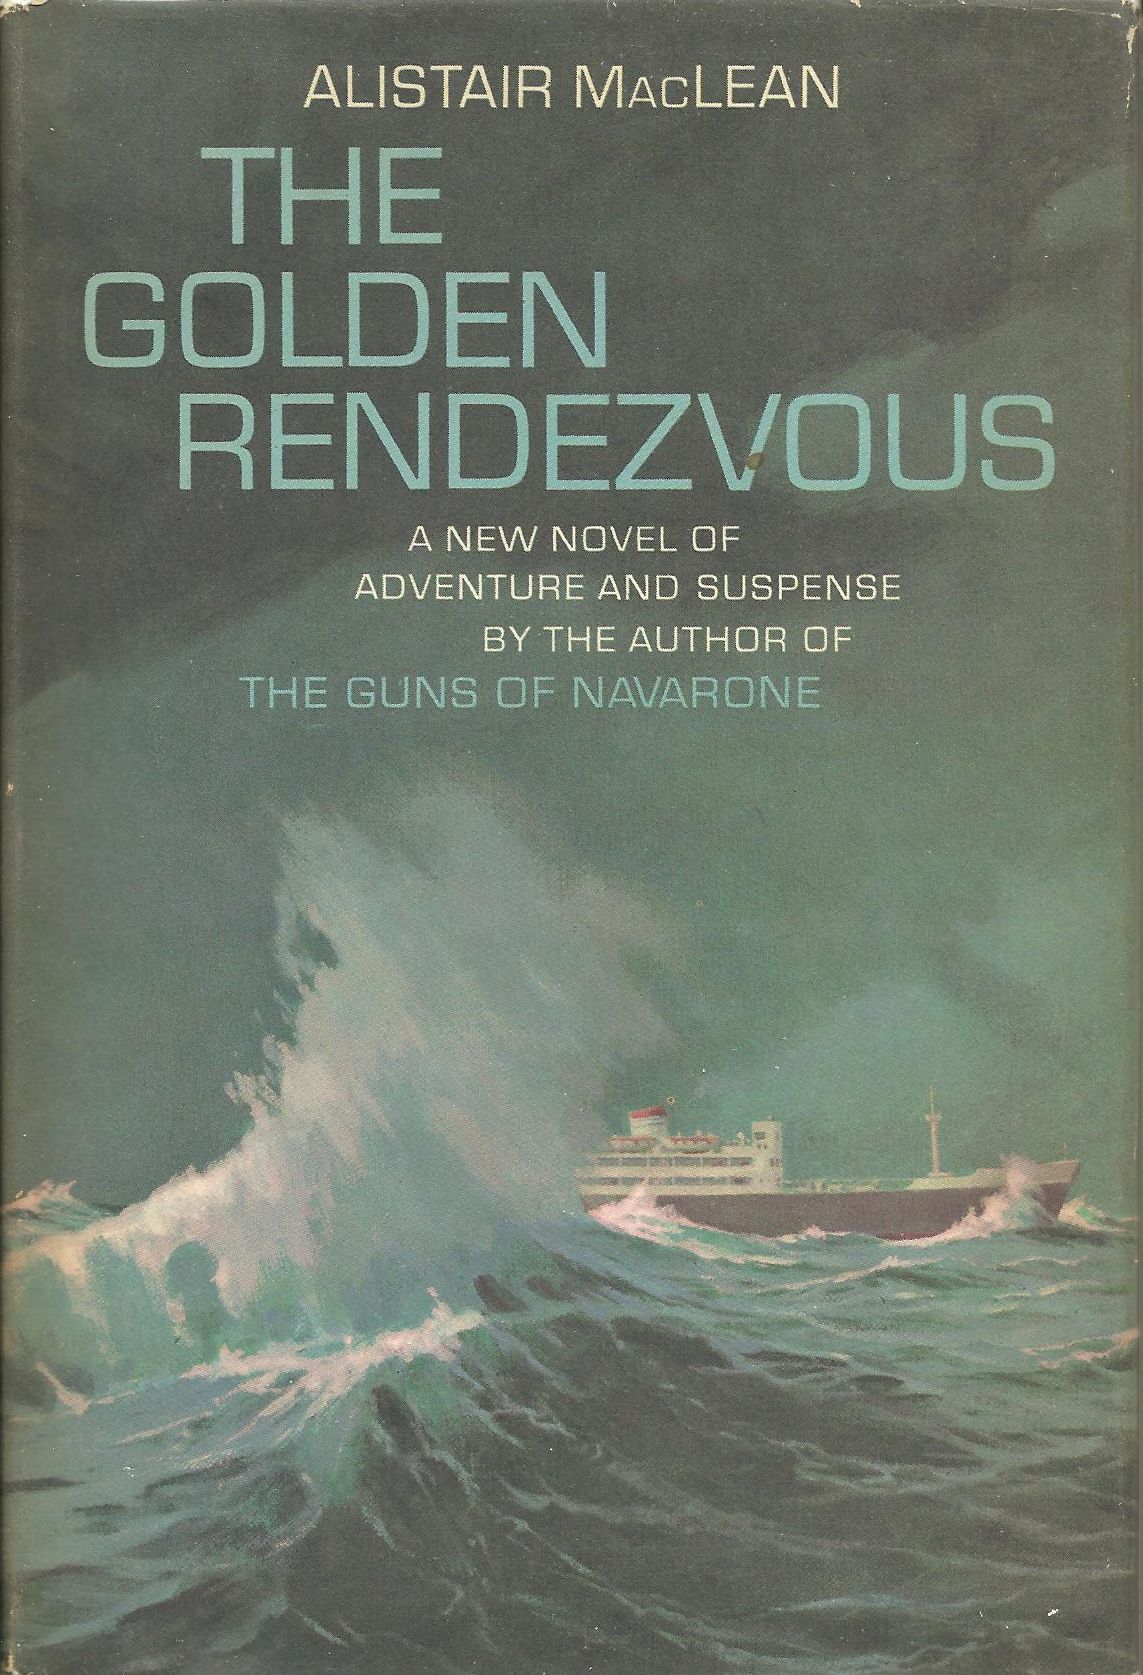 The Golden Rendezvous - US first edition